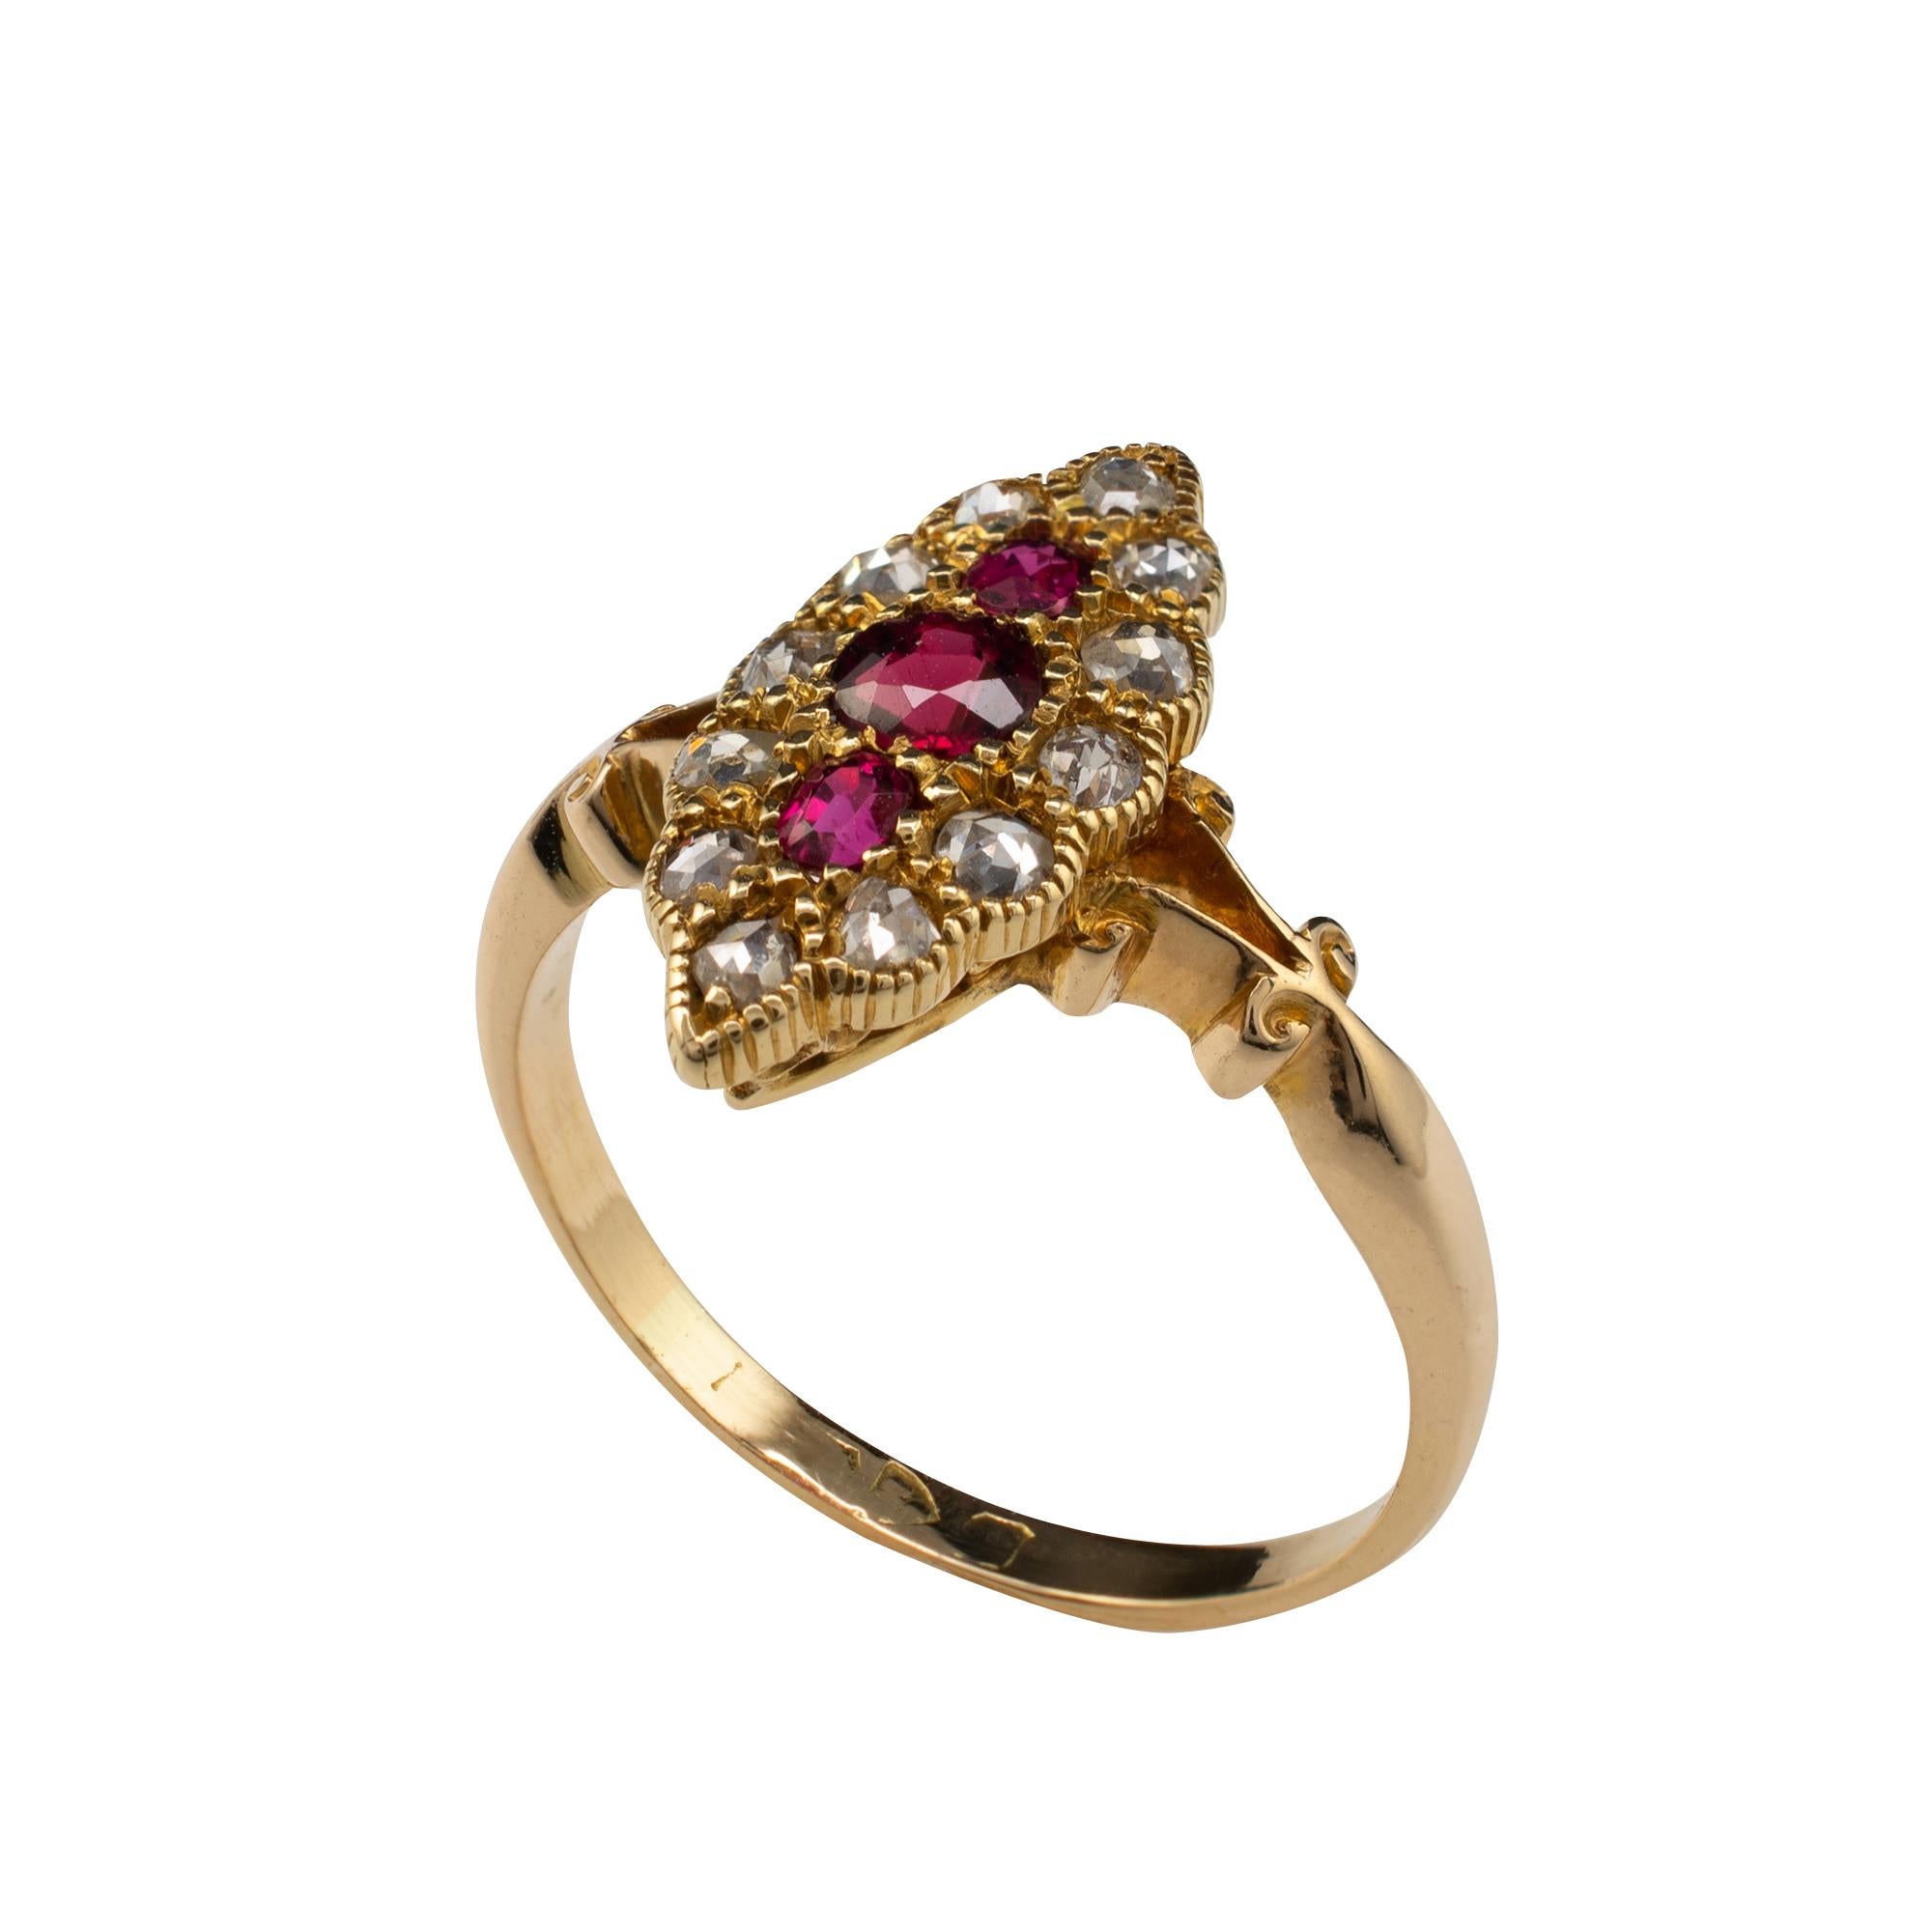 Fine quality ruby and rose-cut diamond antique ring, crafted in 18 karat yellow gold and surmounted with a vertical trio of natural rubies with 12 old rose cut diamonds. The side gallery is detailed with openwork and the bifurcated shoulders are